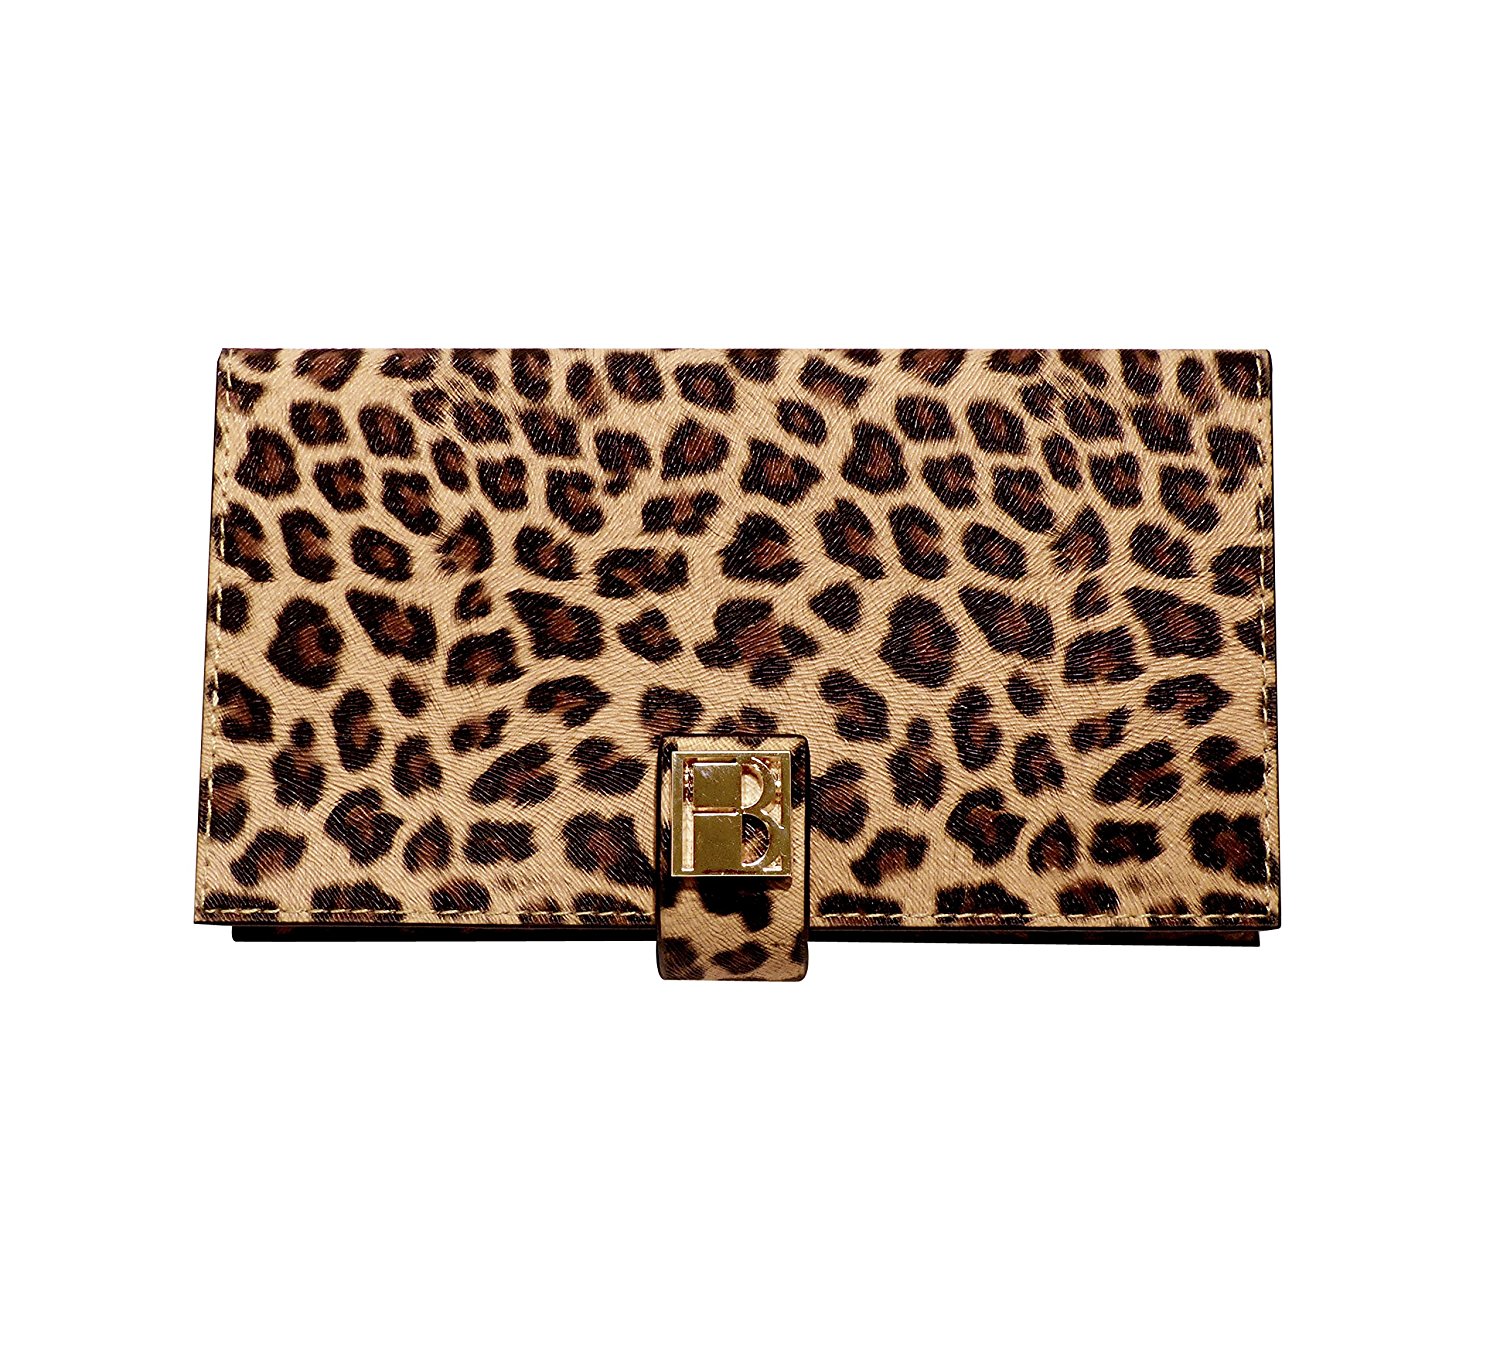 Wild Magnetic Makeup Clutch Handbag: Leopard Cosmetic Organizer with Mirror, Wallet, and Phone Case - Textured Vegan Leather, Silk Fabric Lining, Magnetic Base, Travel Accessory